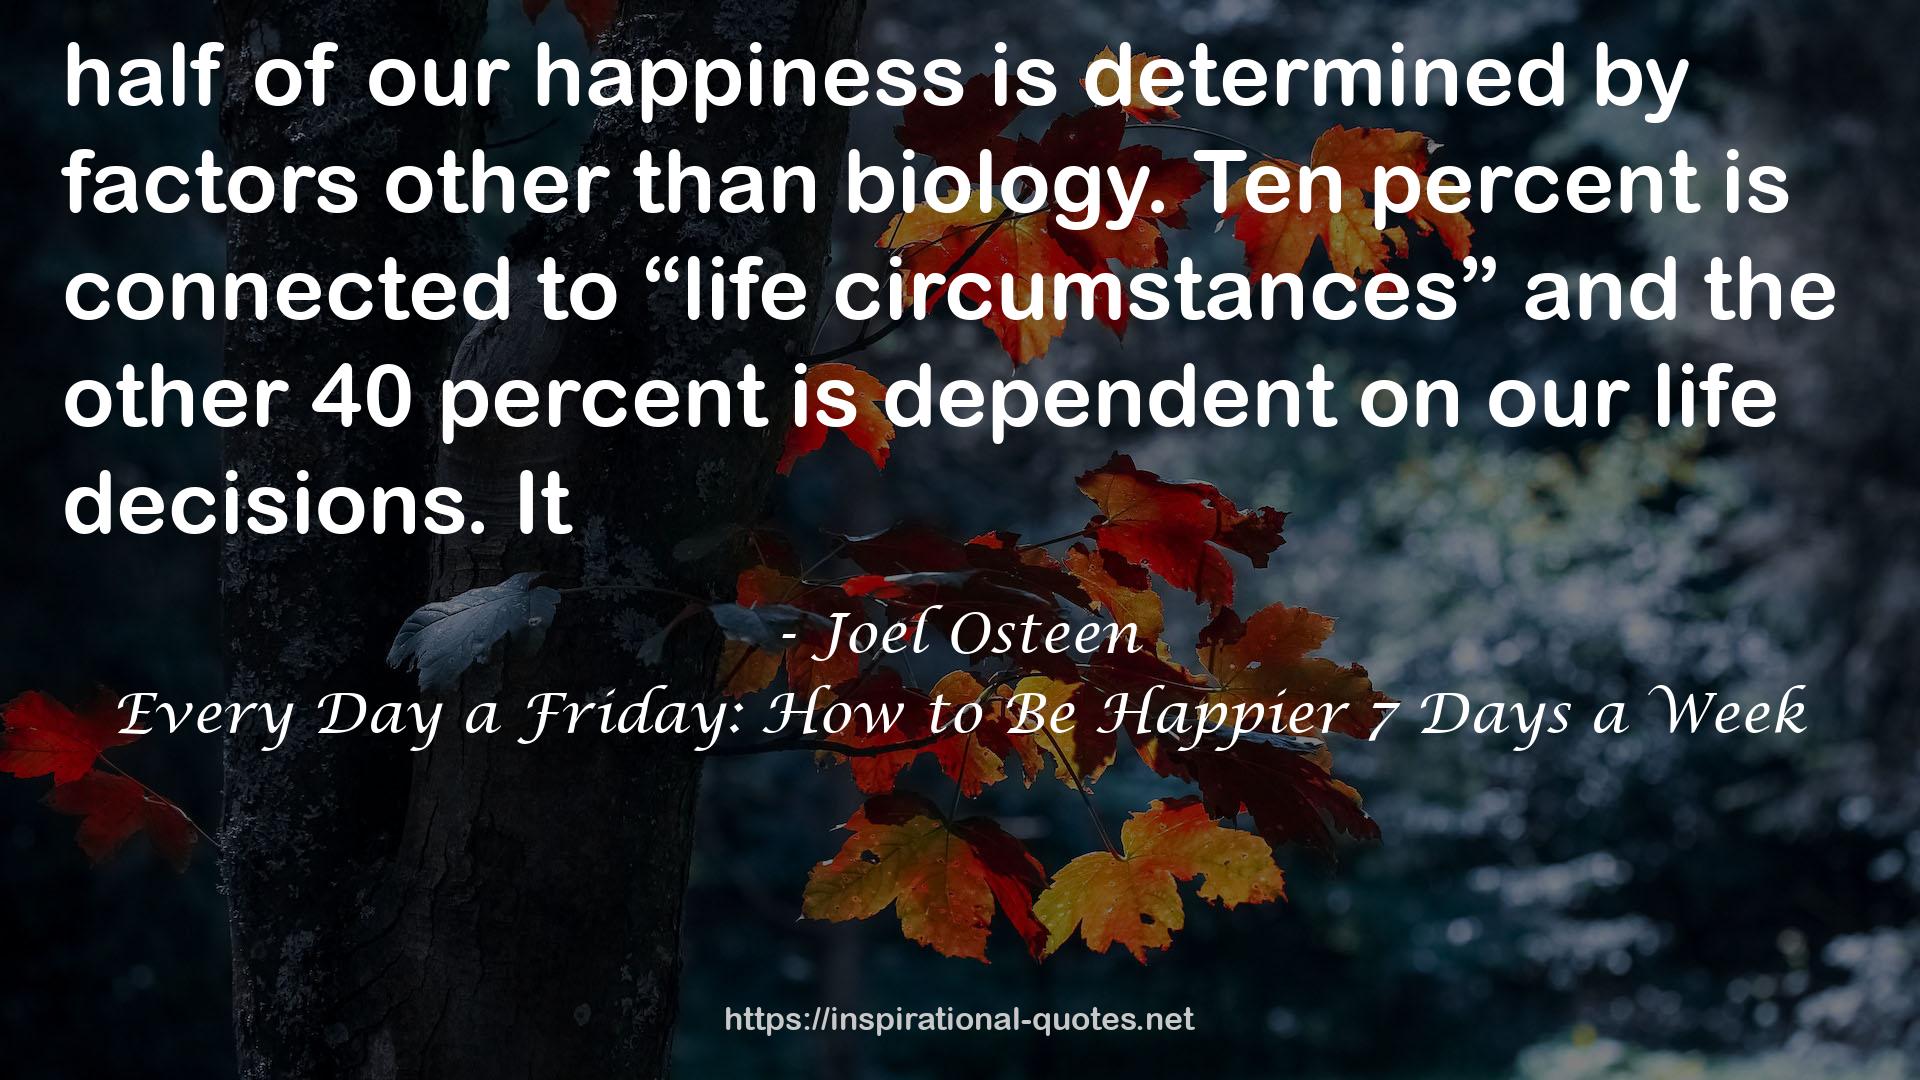 Every Day a Friday: How to Be Happier 7 Days a Week QUOTES